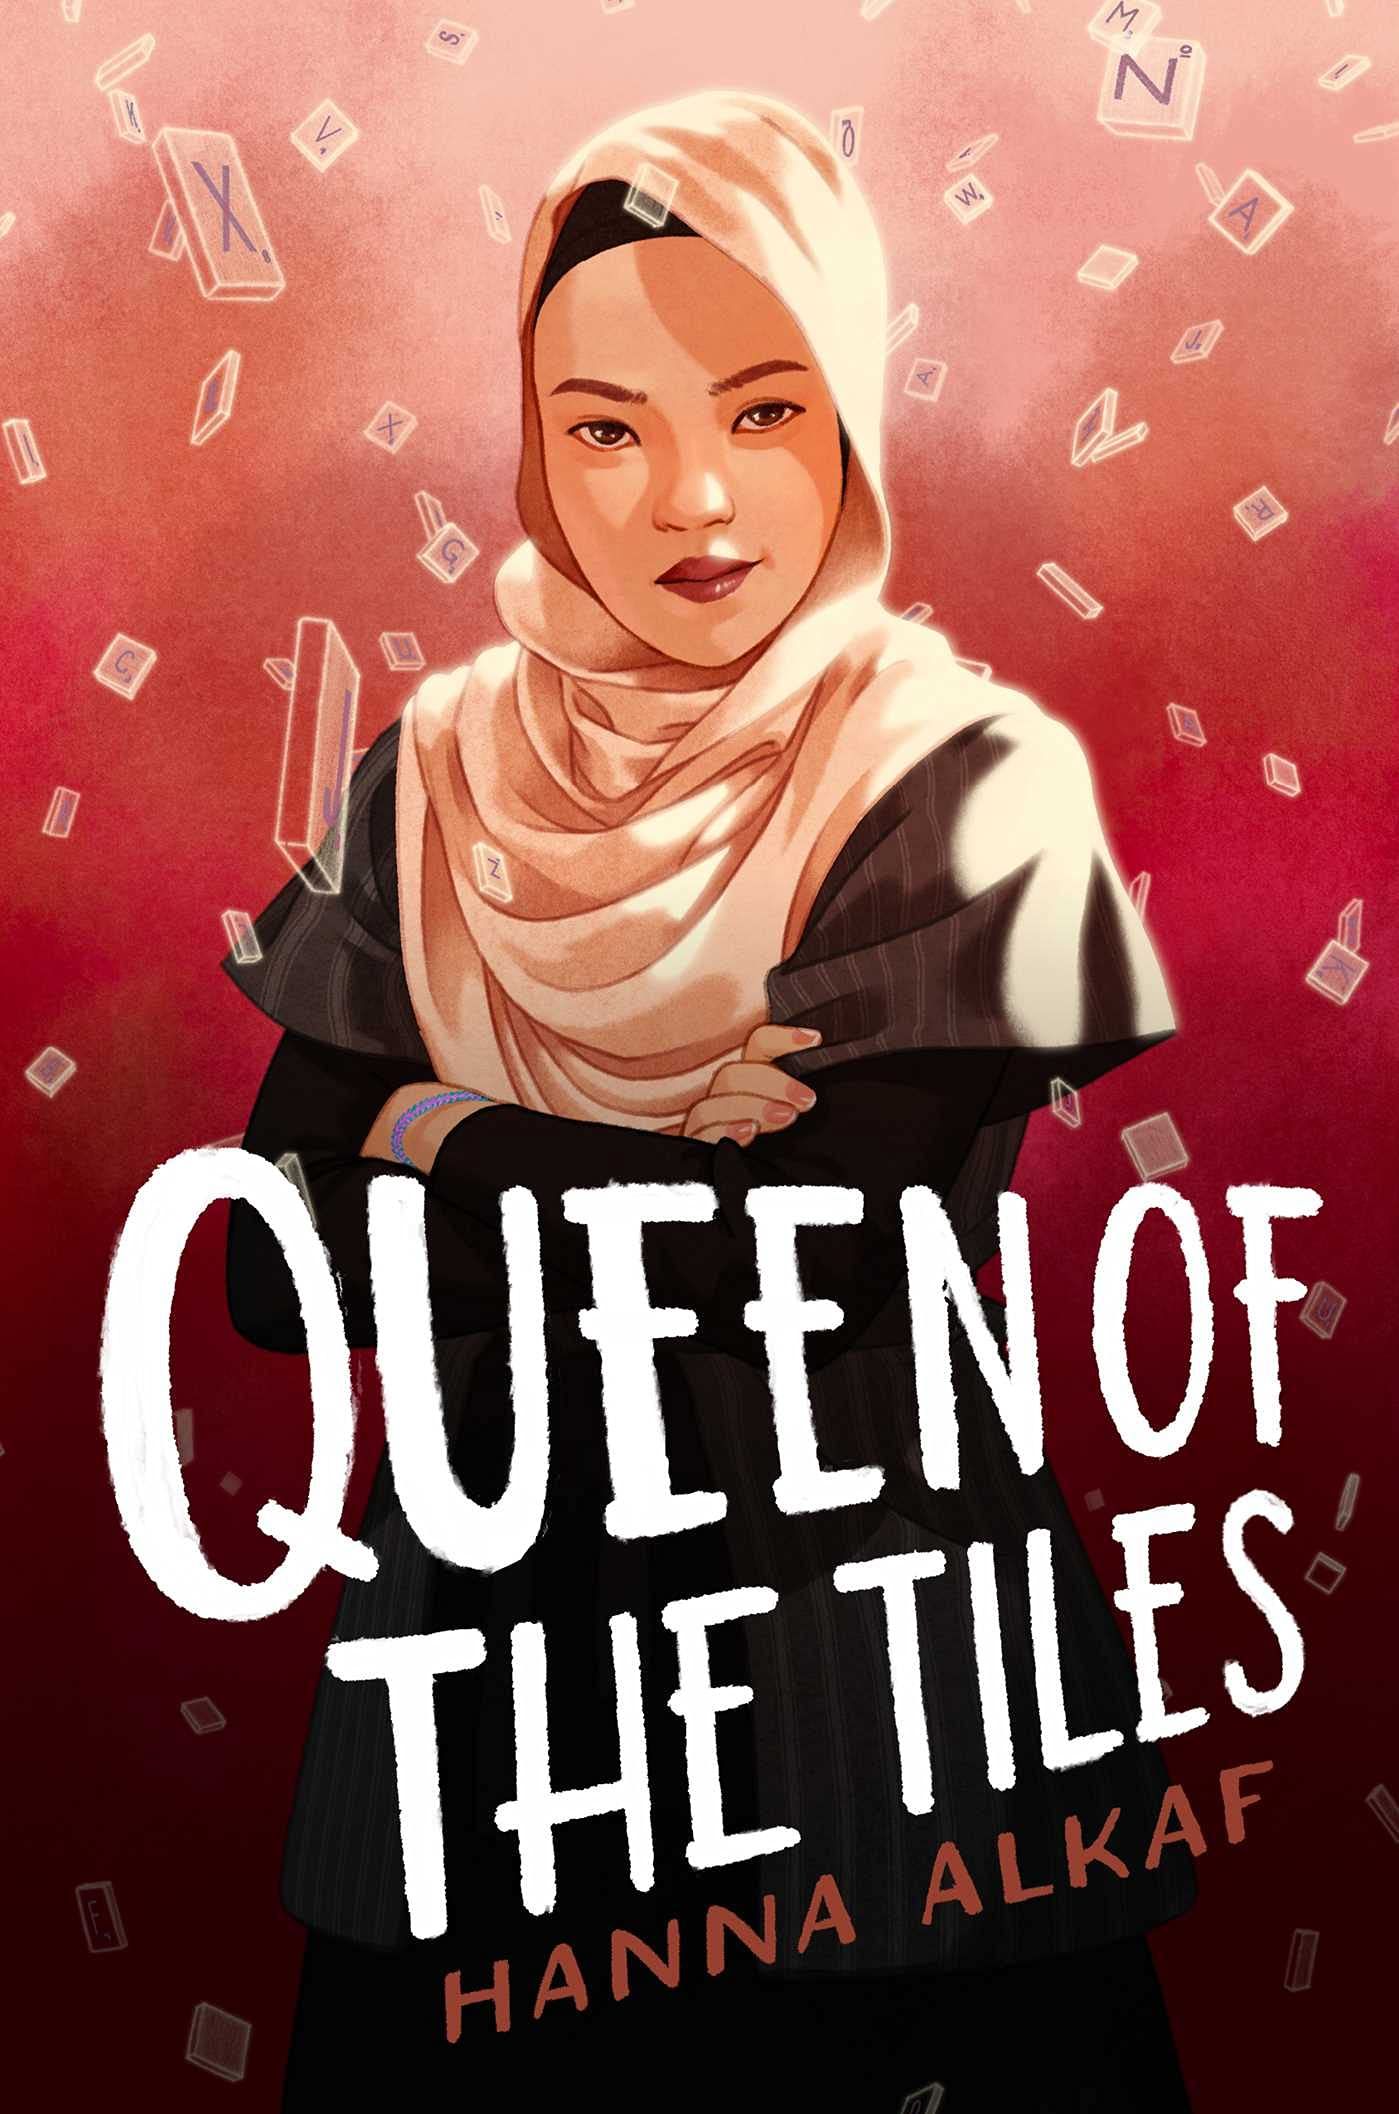 Cover image of "Queen of the Tiles" by Hanna Alkaf.